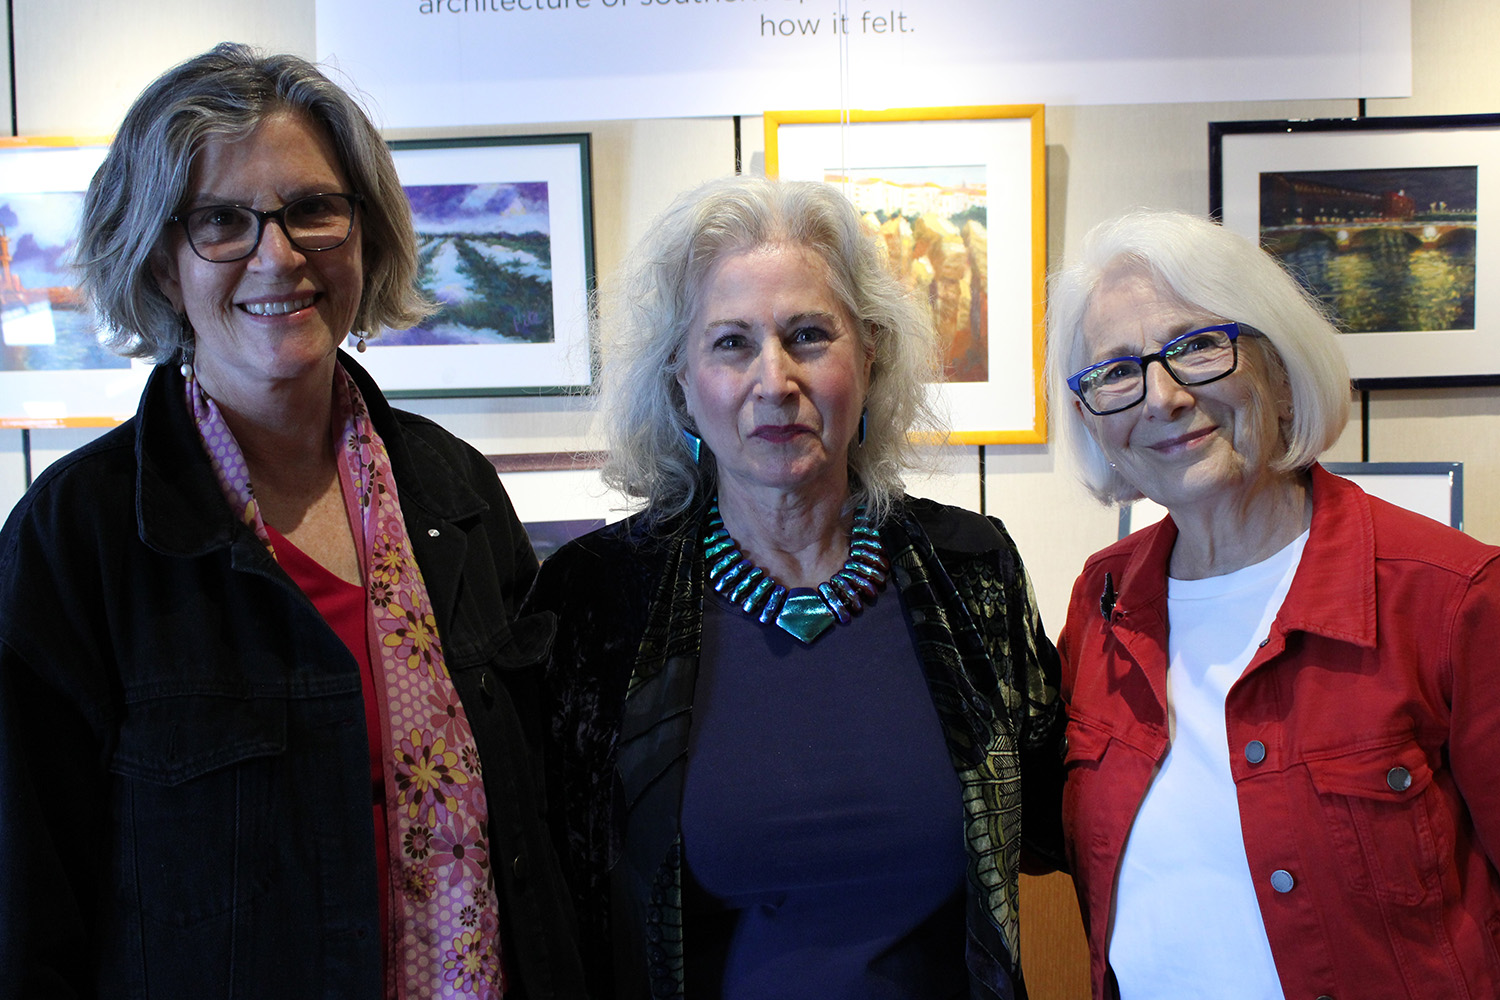 Elizabeth Pite with, left, Lois Hessert Blawie and, right, Rebecca Earl